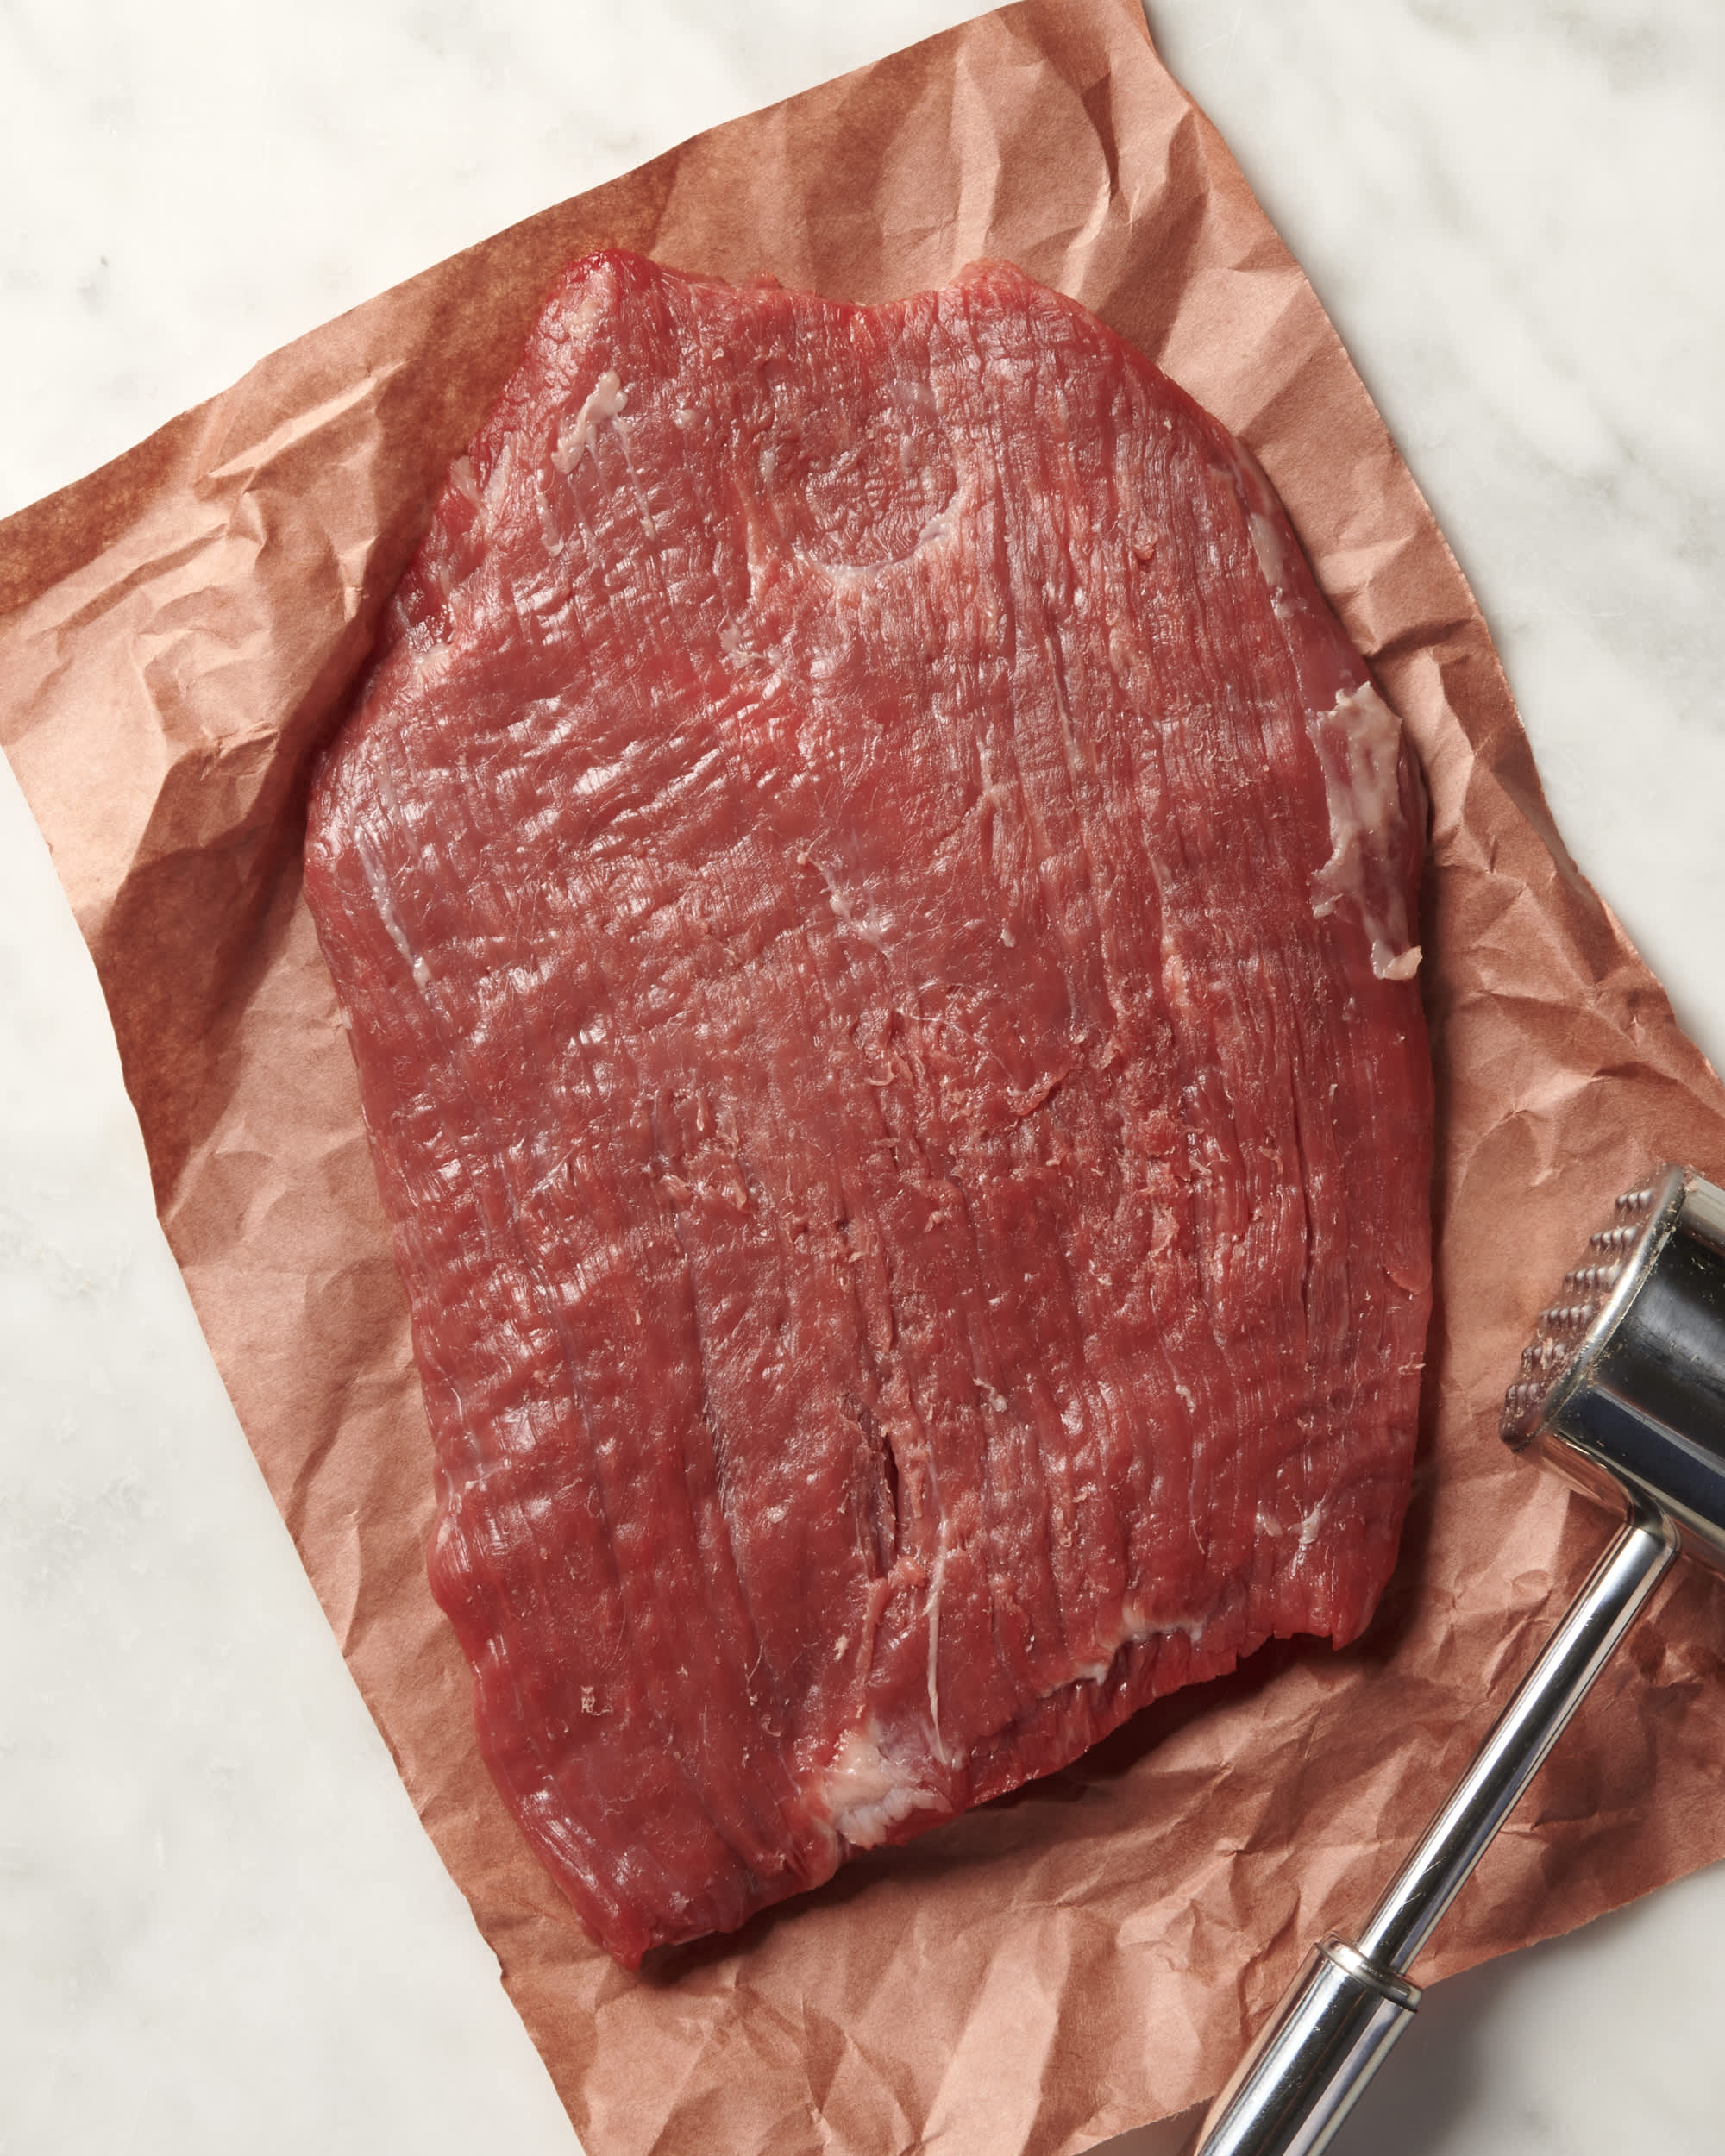 The Secret to Better Steak? Cook It Like the French Do.